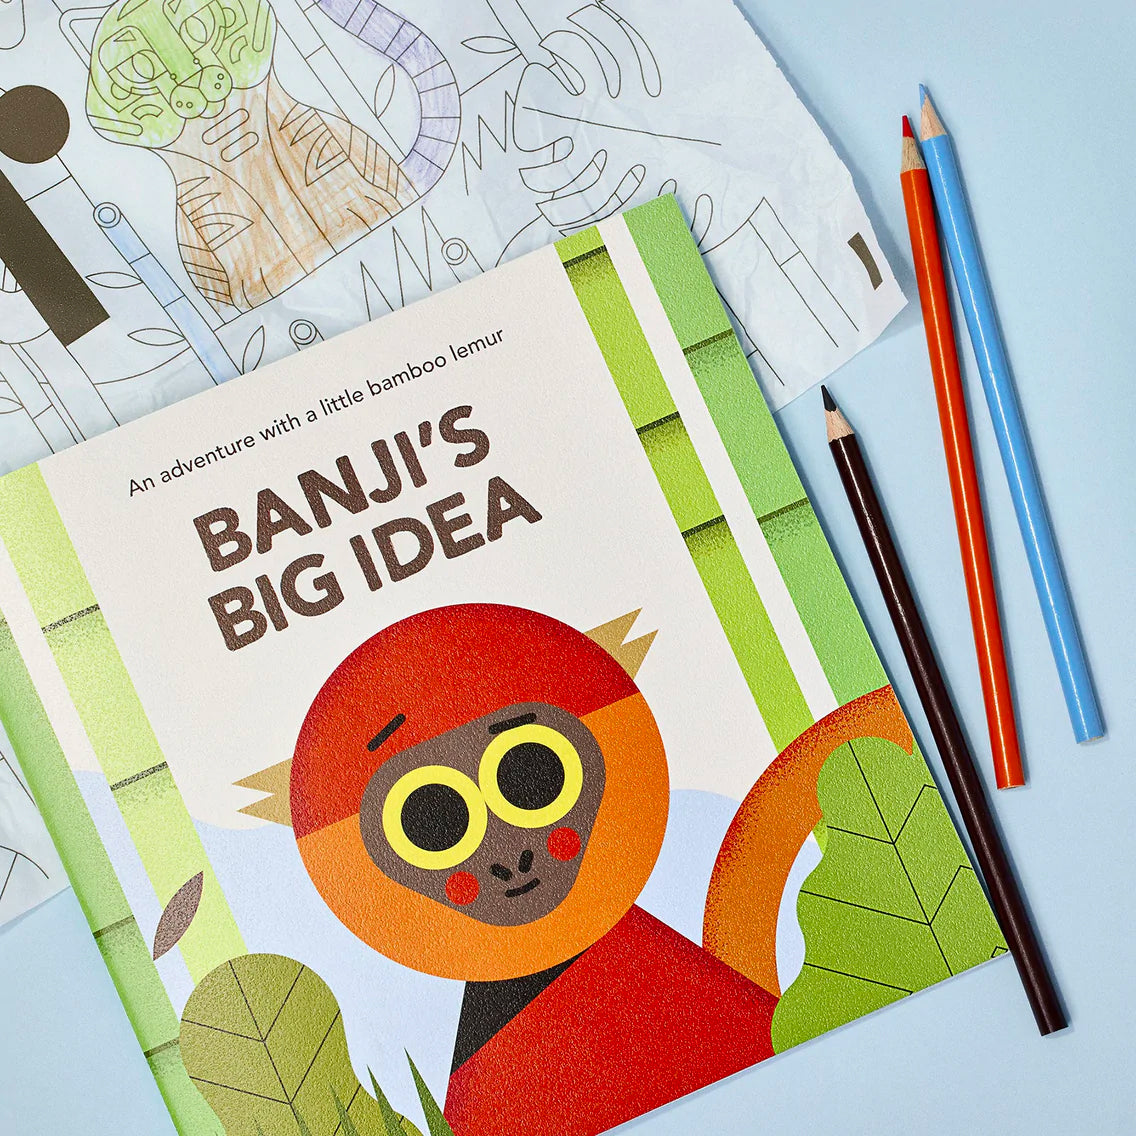 Banji's Big Idea story book next to a coloring page featuring a tiger in a bamboo forest and three color pencils